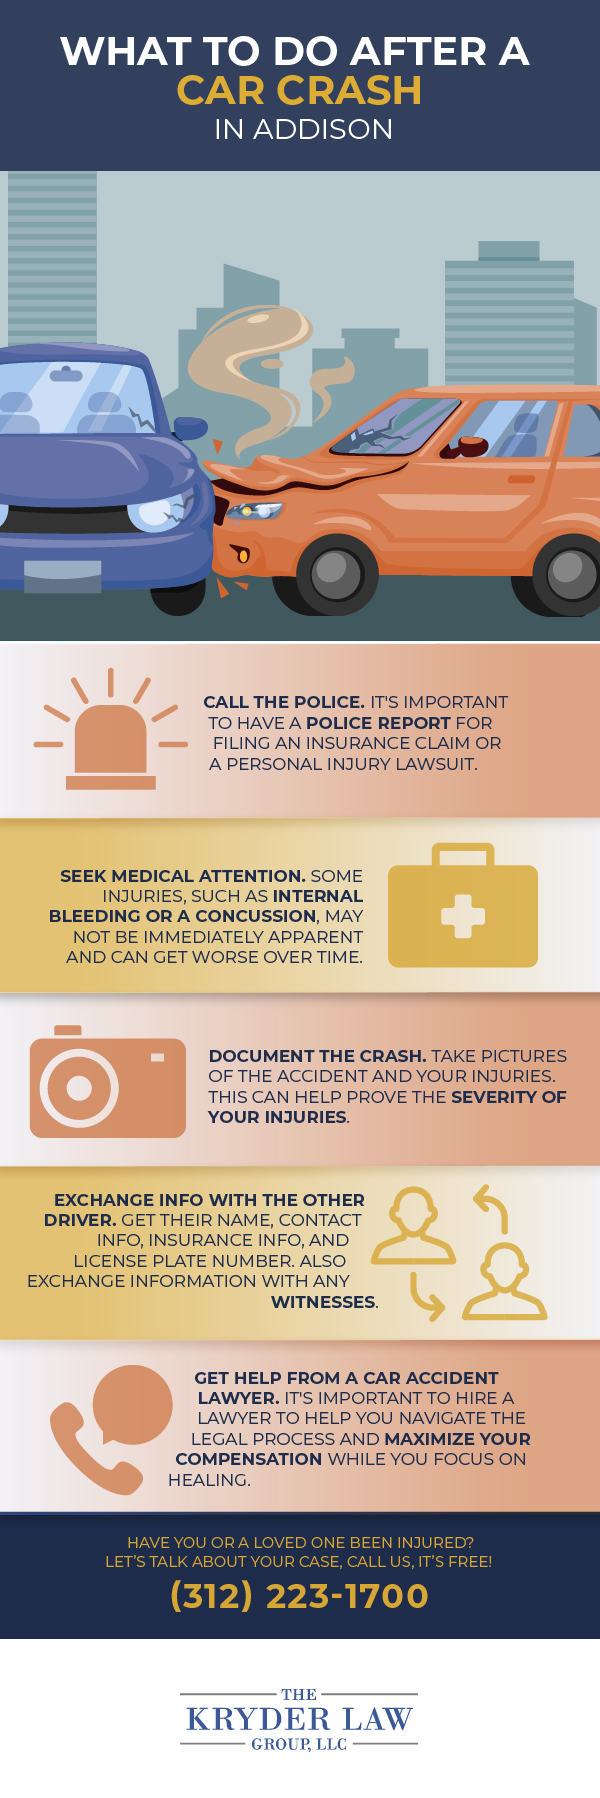 The Benefits of Hiring a Addison Car Accident Lawyer Infographic